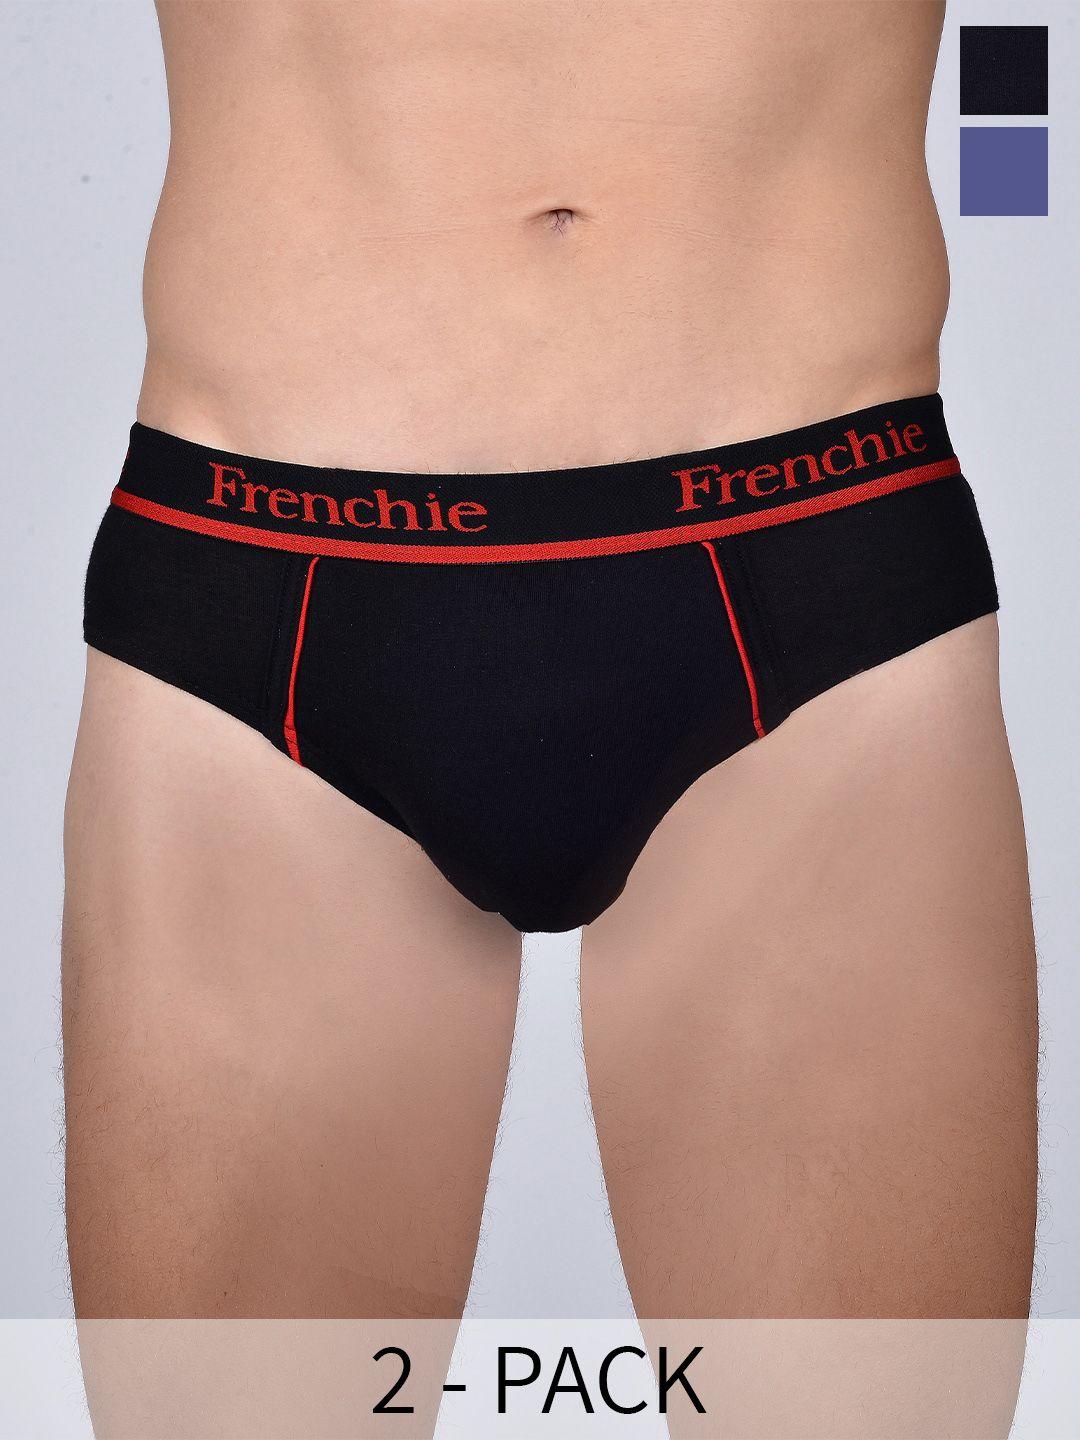 frenchie pack of 2 assorted cotton basic briefs-fr-mi-bf-pro-10p-95-po2